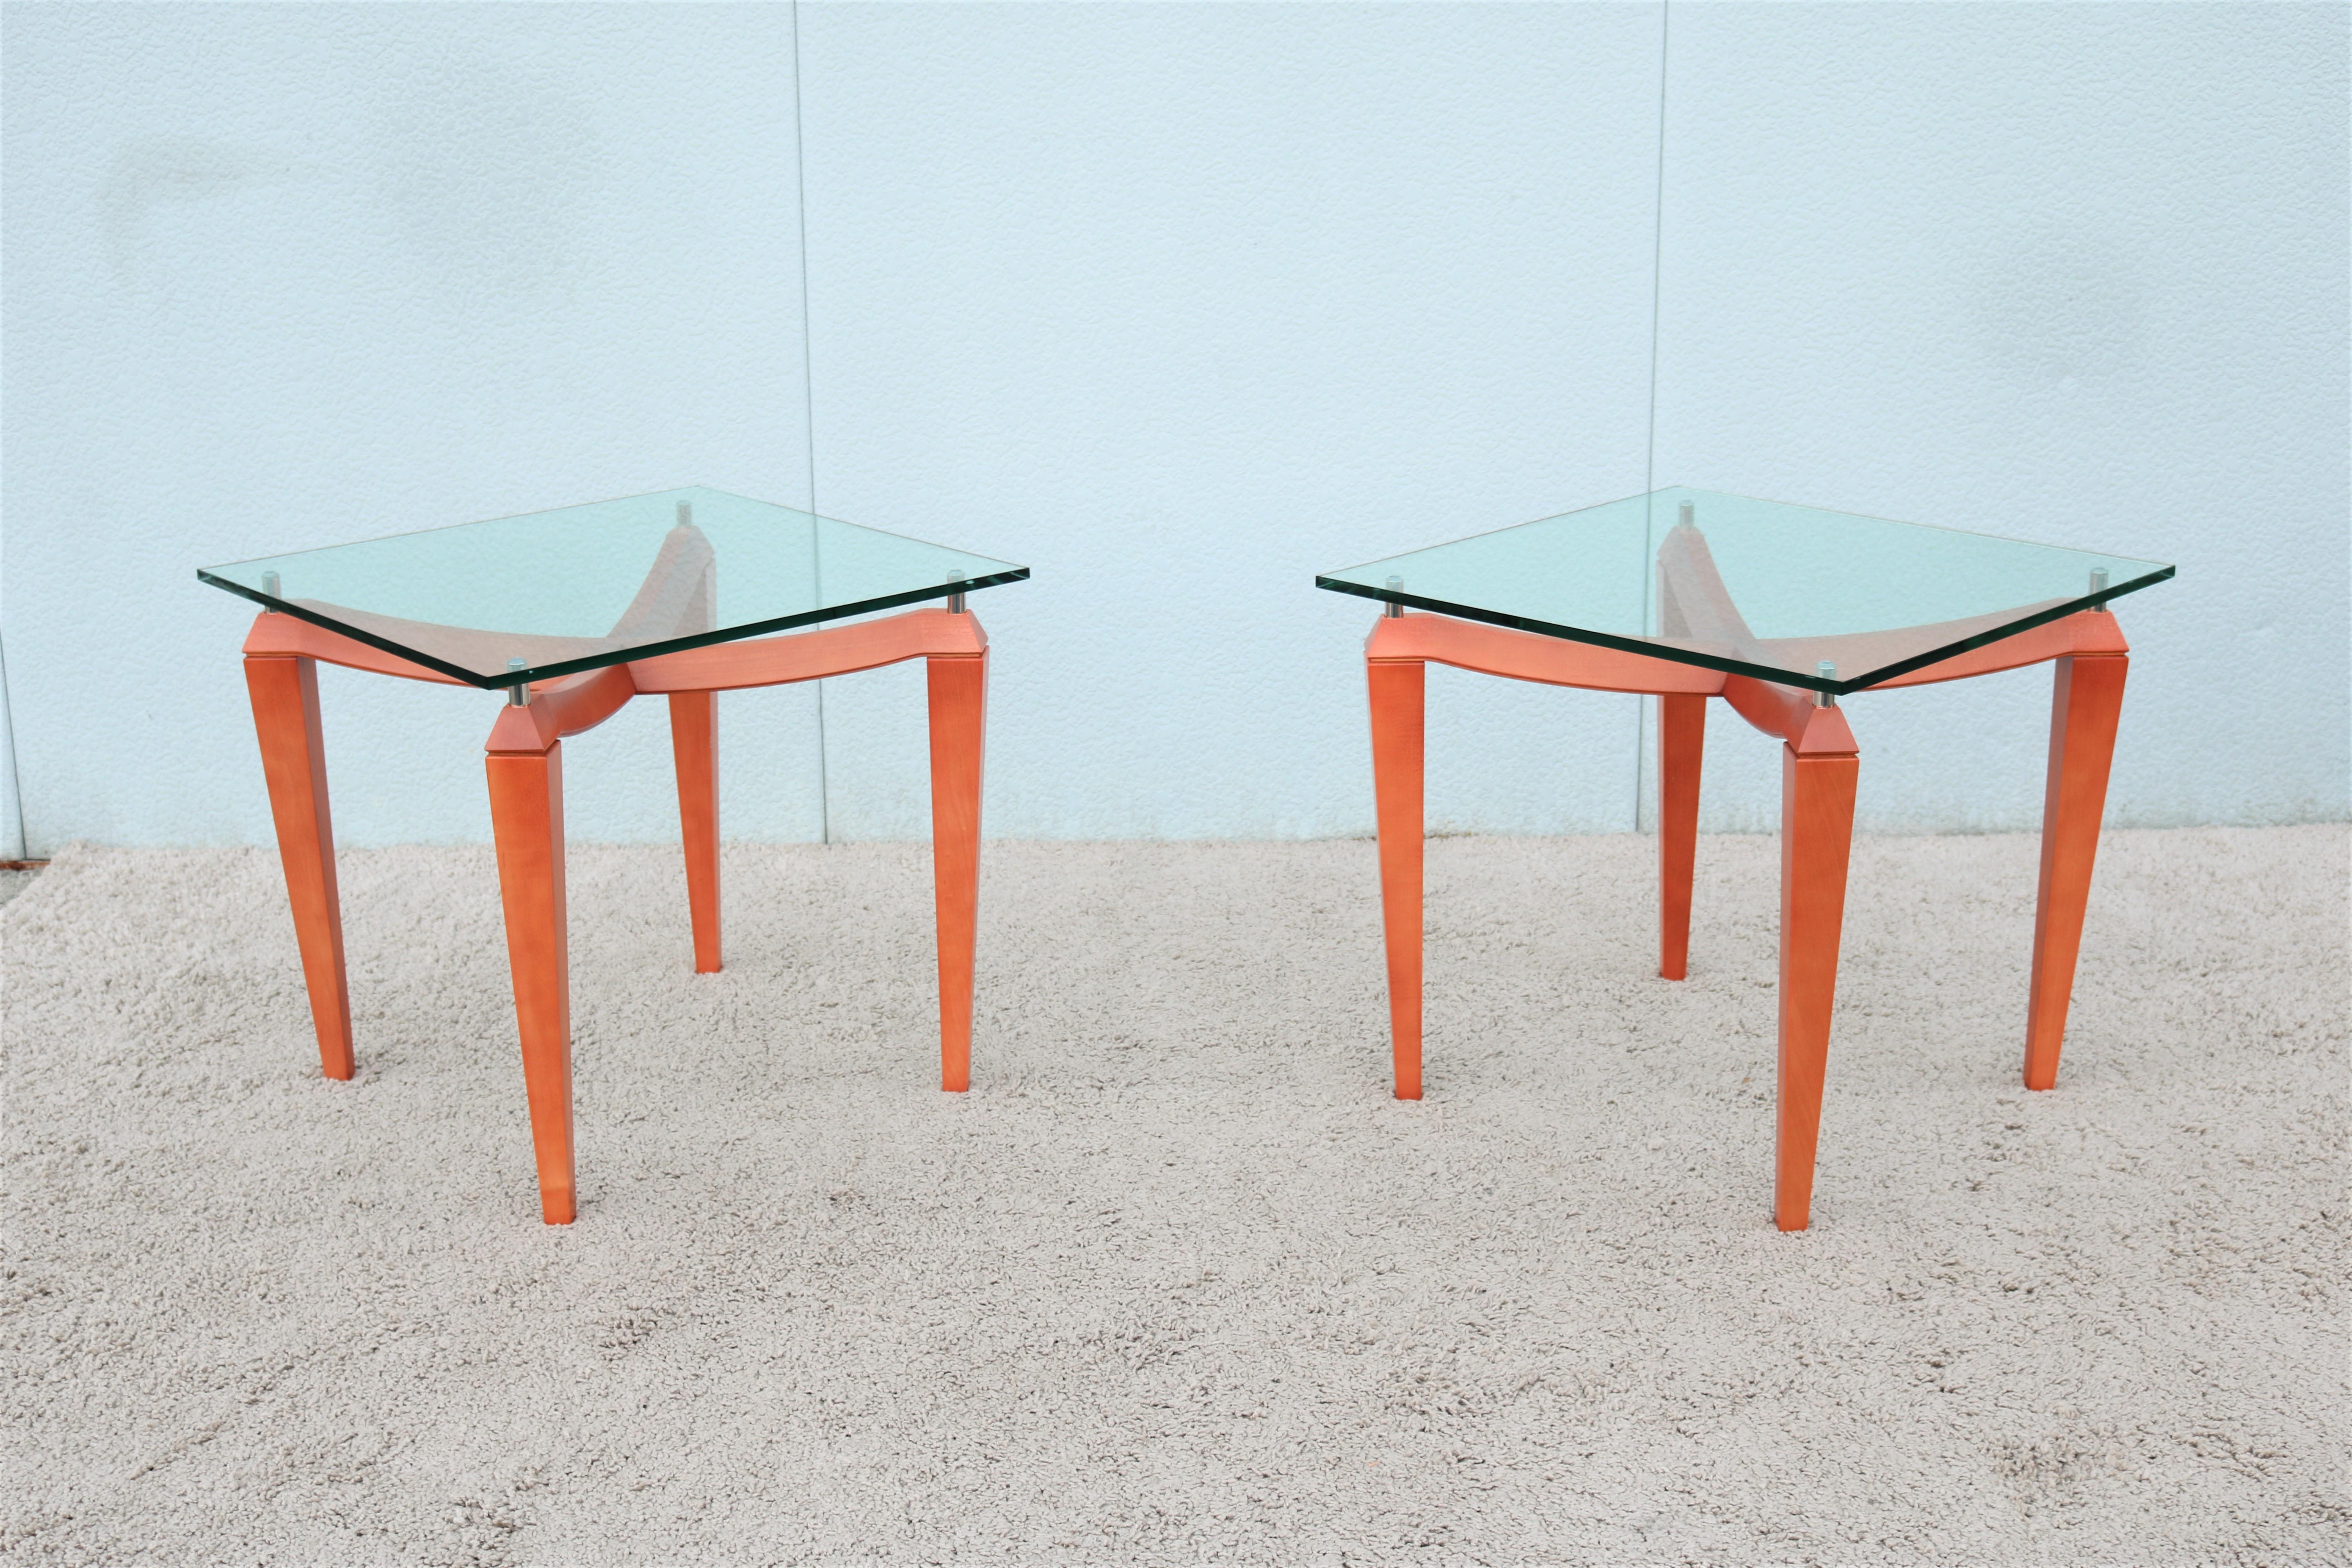 20th Century Modern Italian Cherry Wood and Transparent Glass Square Side Tables - a Pair For Sale